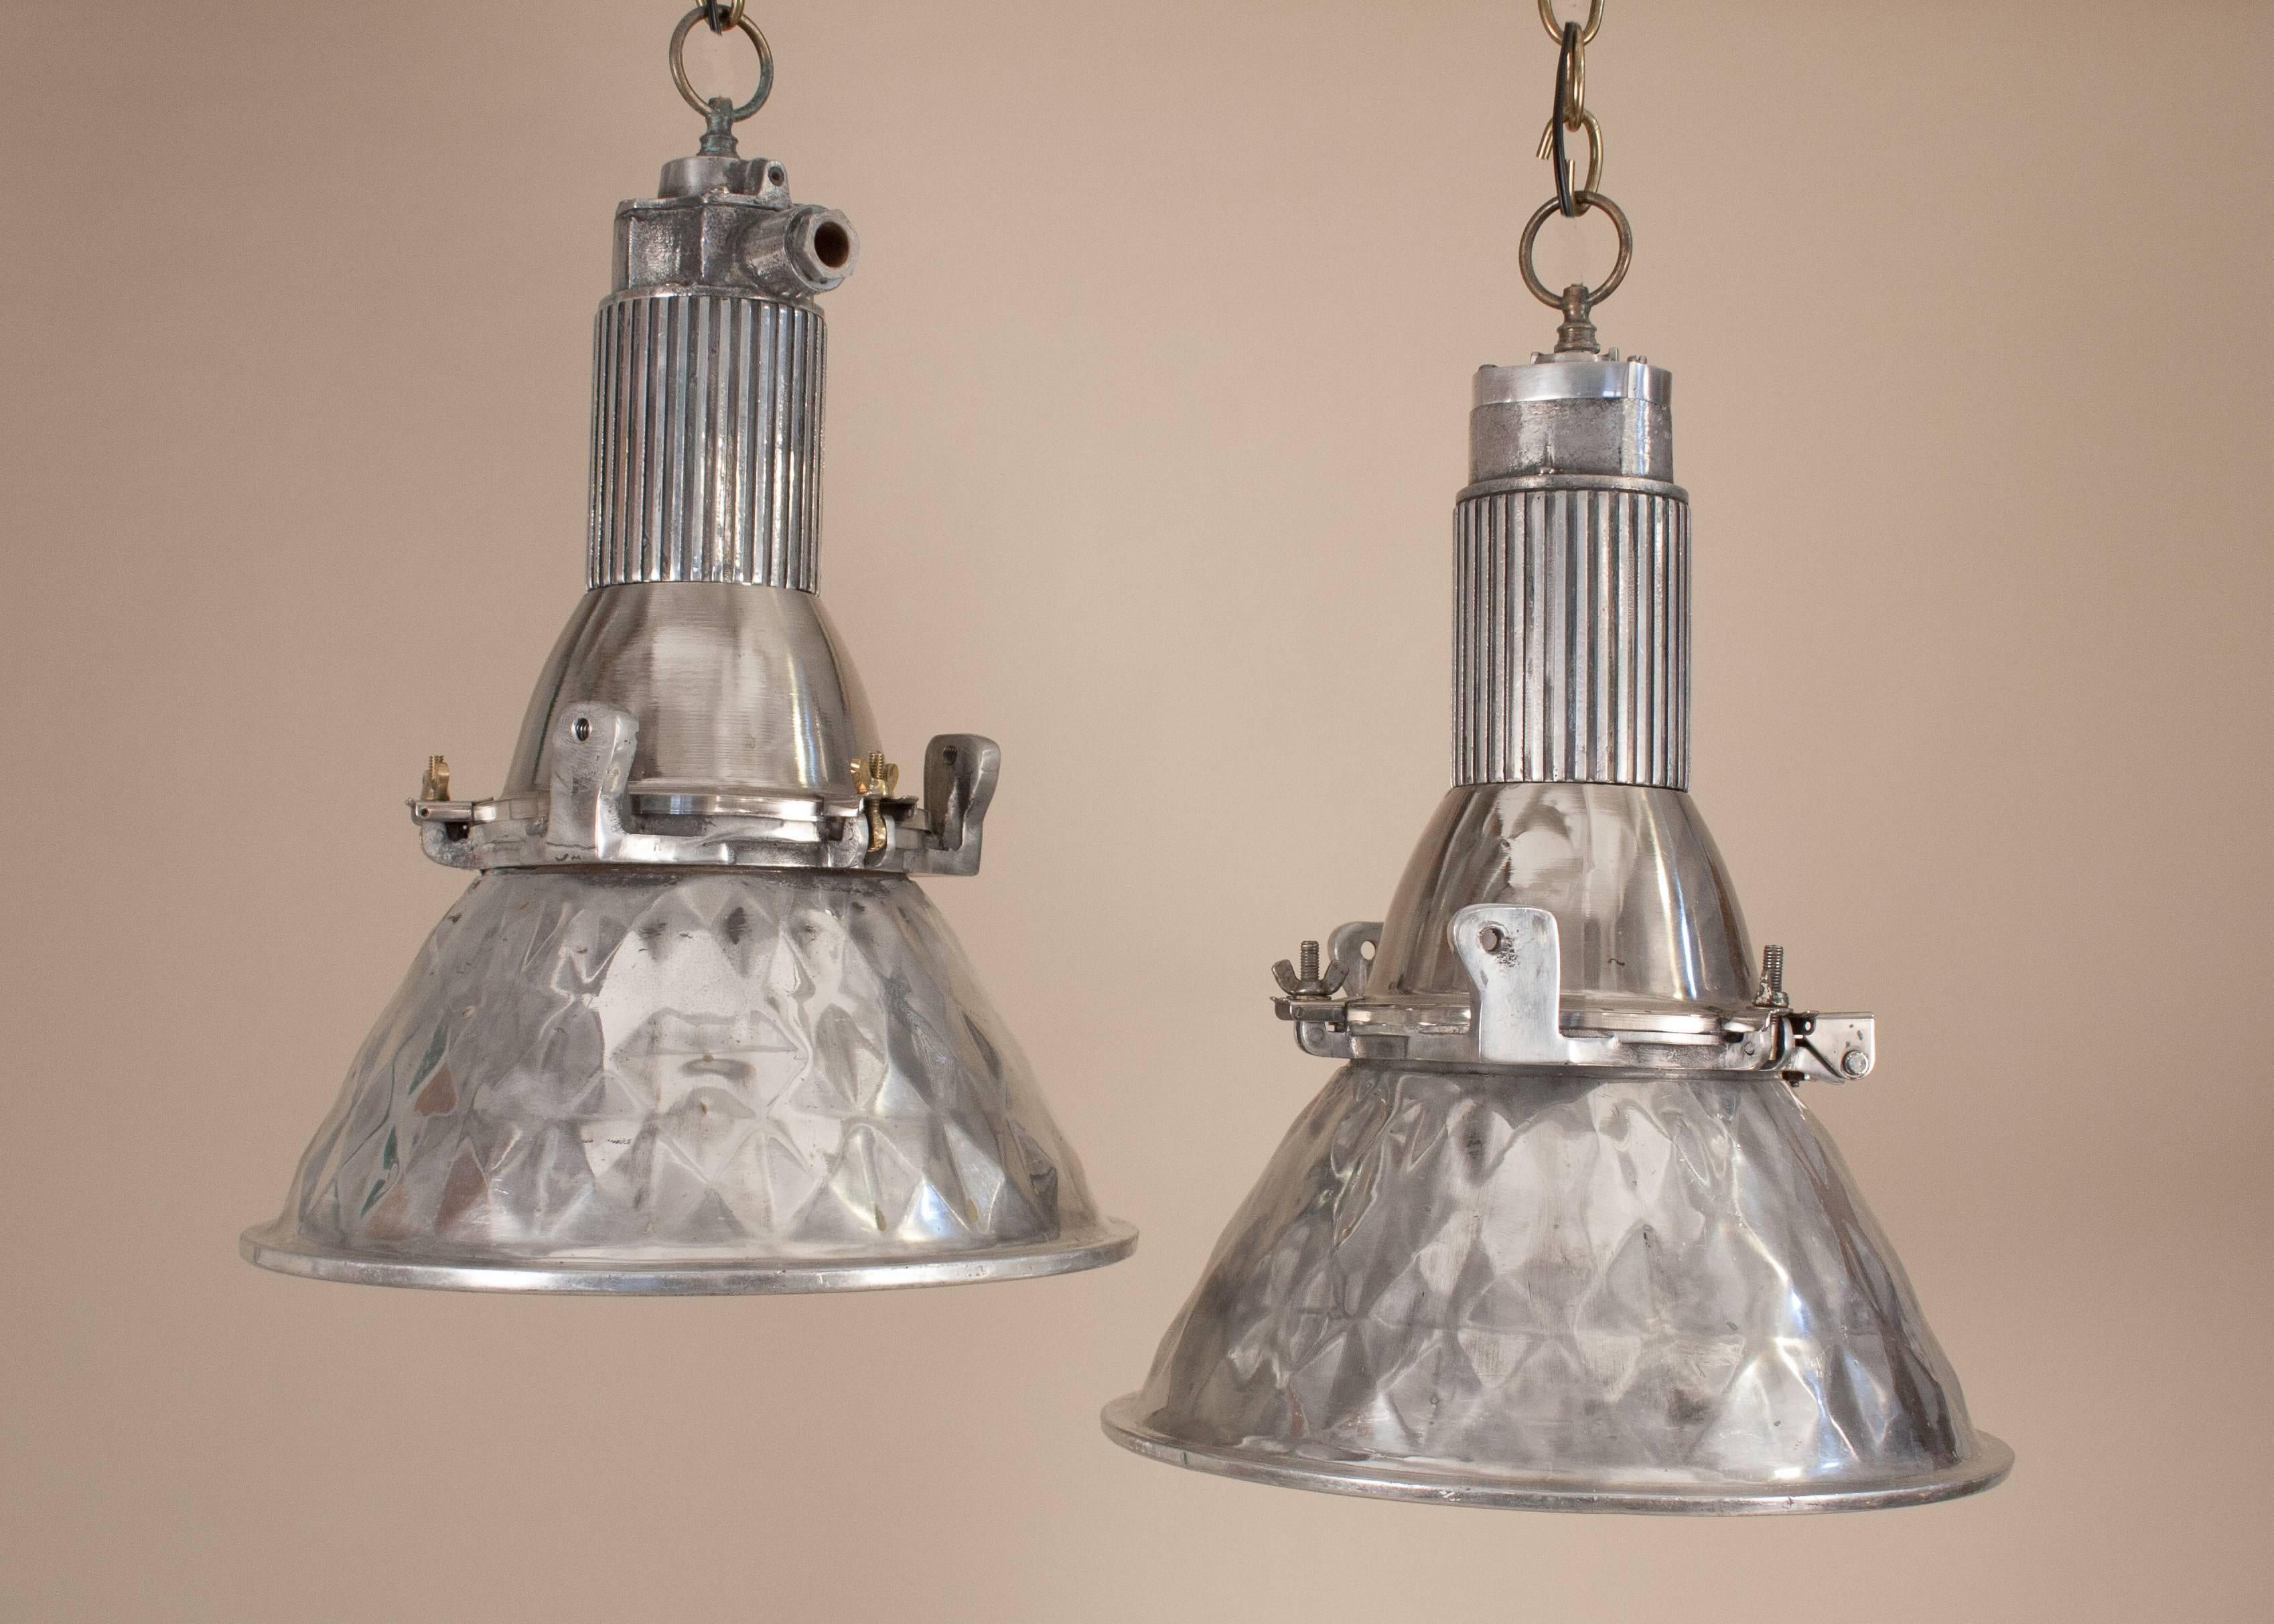 Pair of petite, polished aluminum Industrial pendant lights with pressed geometric pattern on the outside and inside of the shades. These small spotlights have been nicely restored and newly re-wired. Hinged enclosures help simplify bulb-changing.